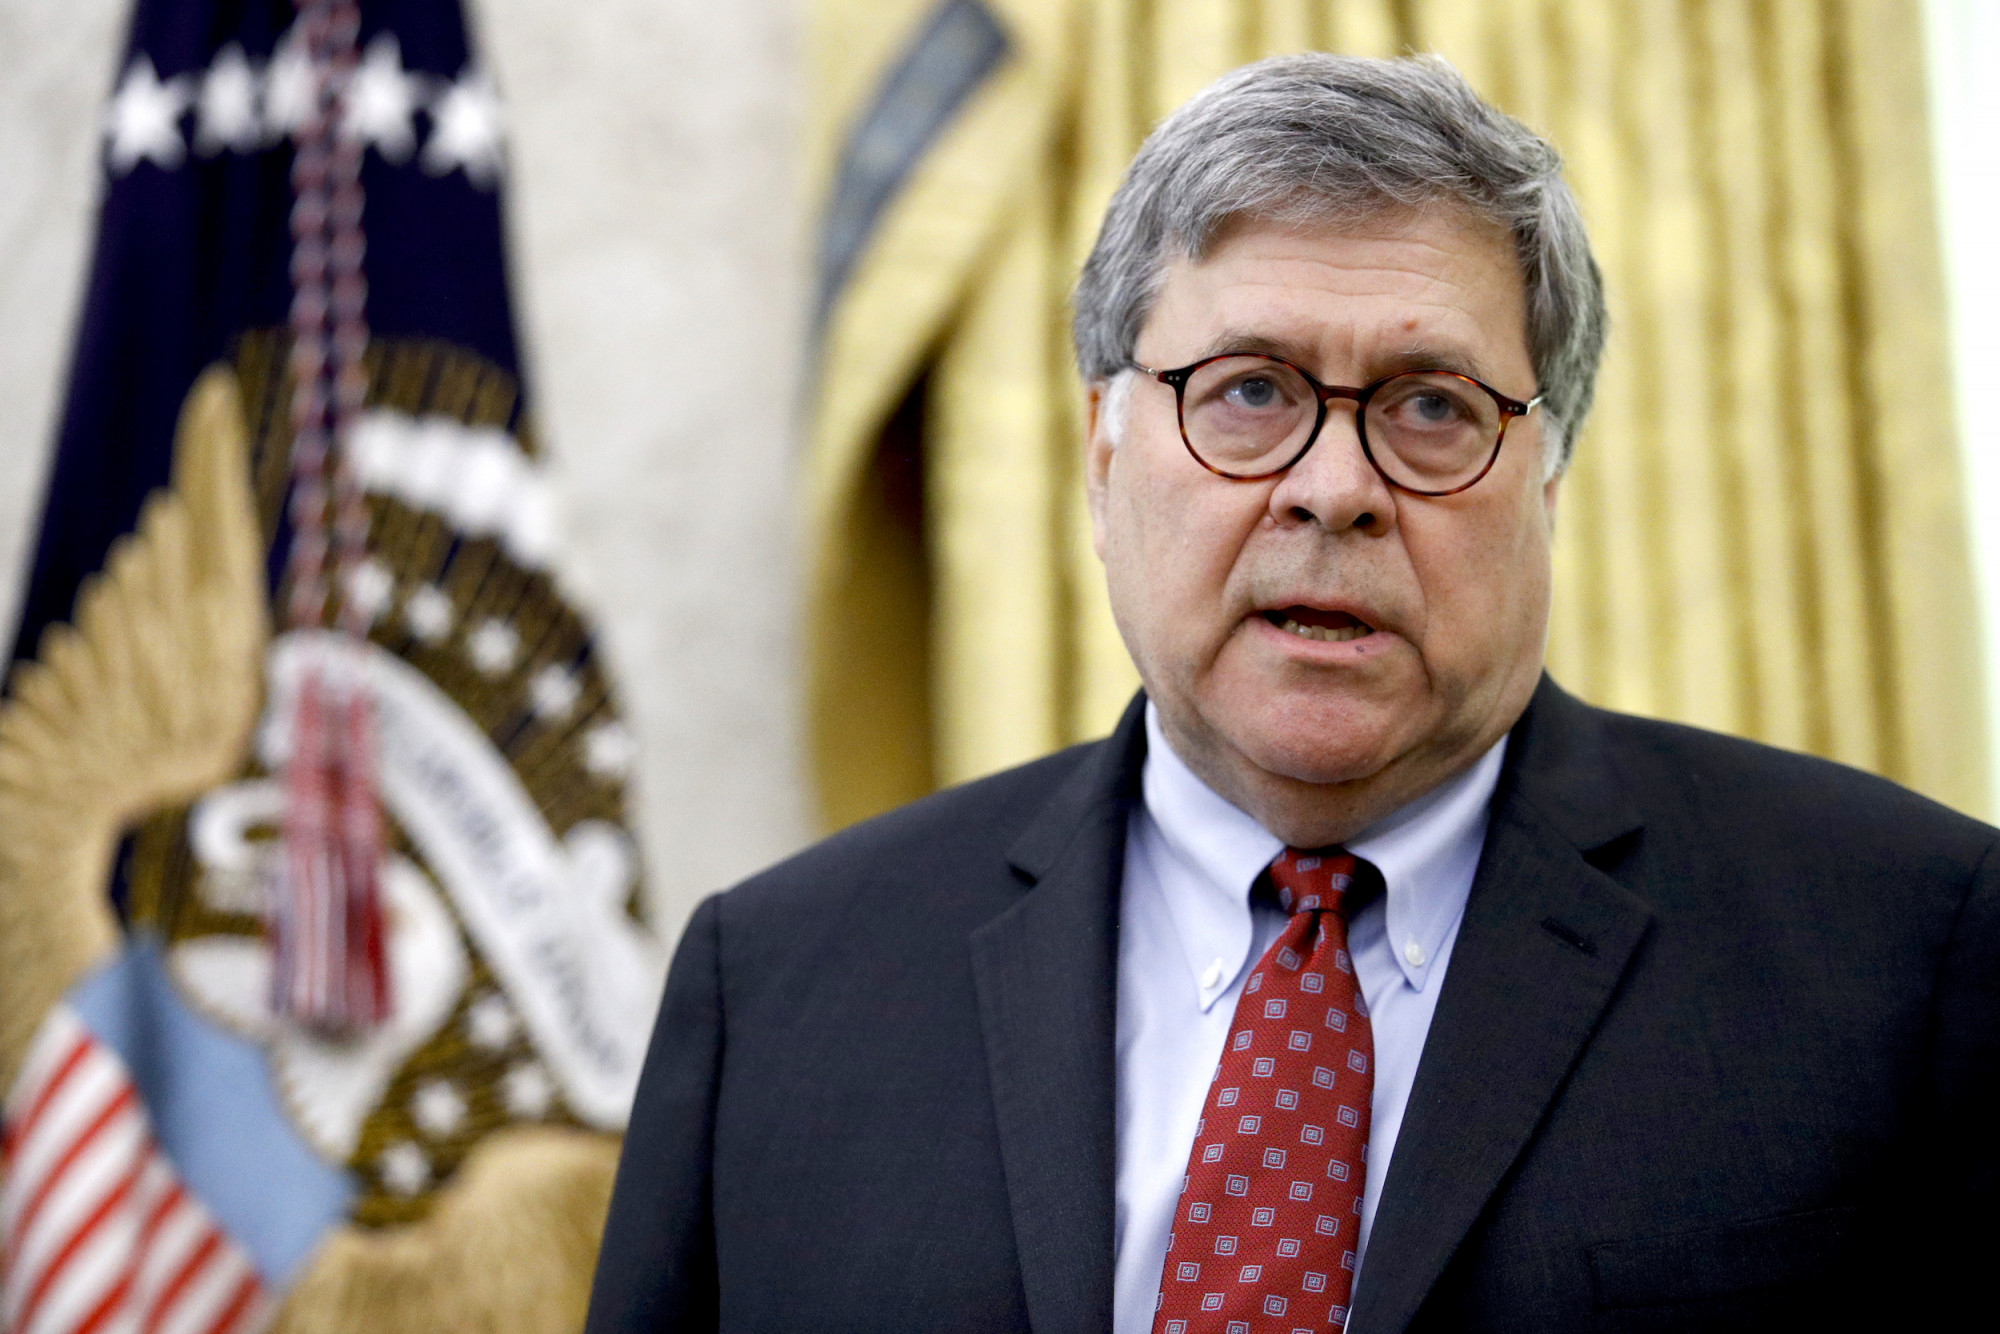 Barr Criticizes Journalistic Integrity of Media Over Riot Coverage